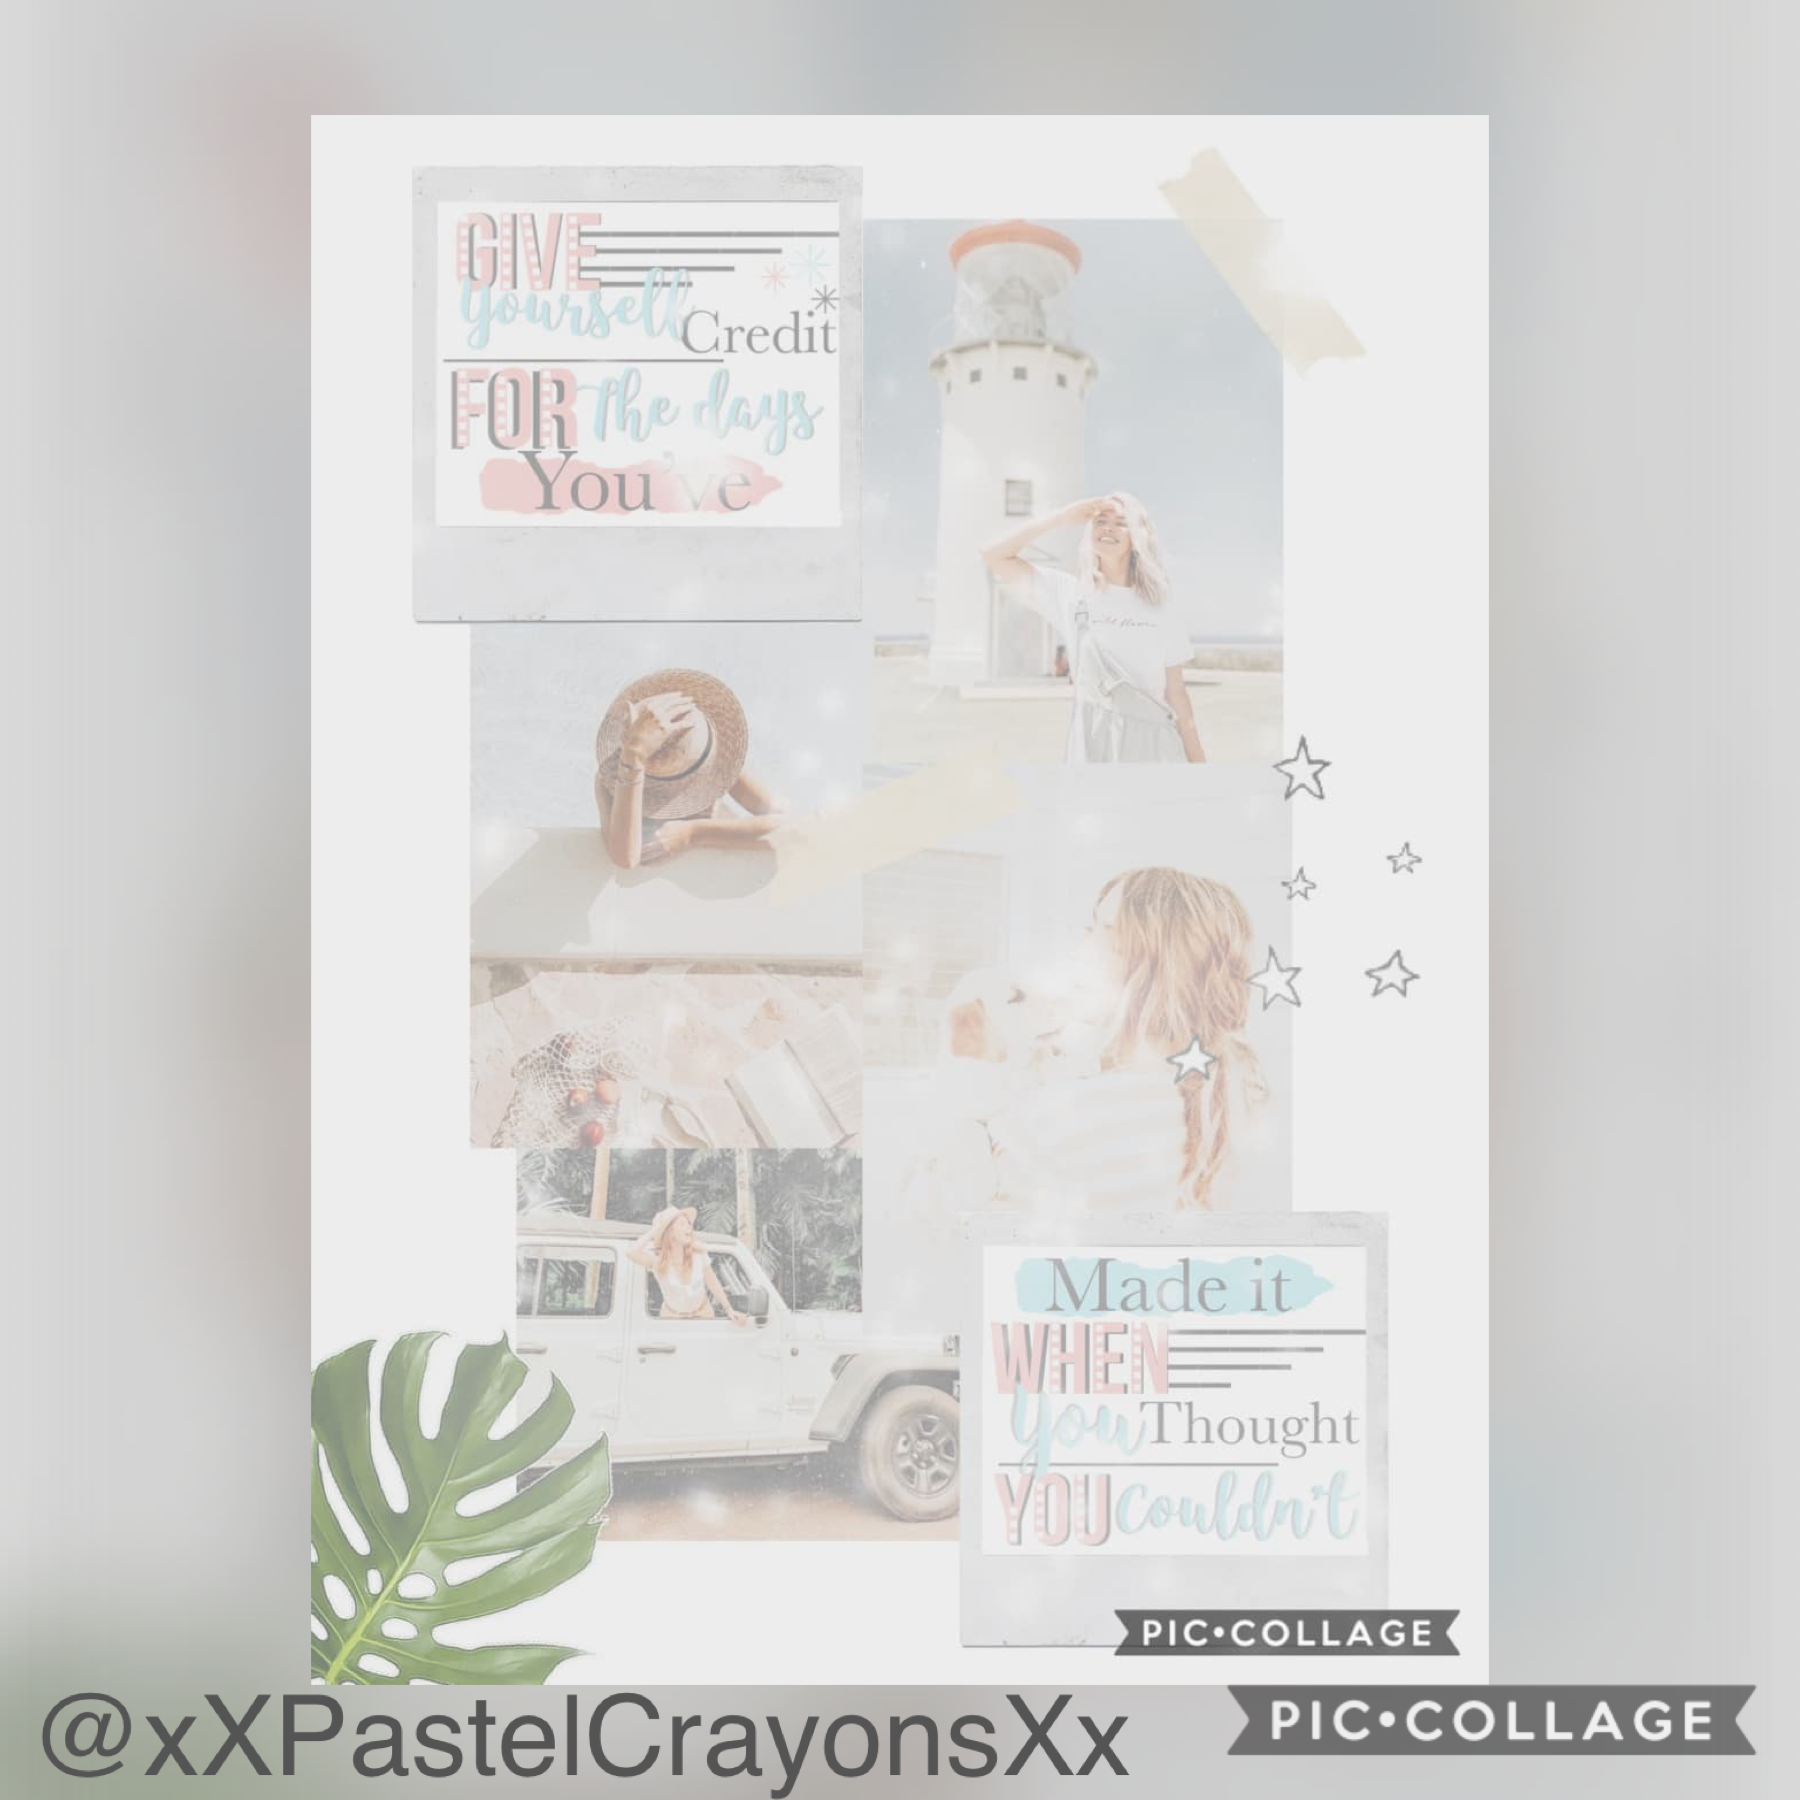 featuring...
xXPastelCrayonsXx!
i think they are underrated 
like this collage is amazing 
they deserve more attention 
🌿go follow them!!🌿